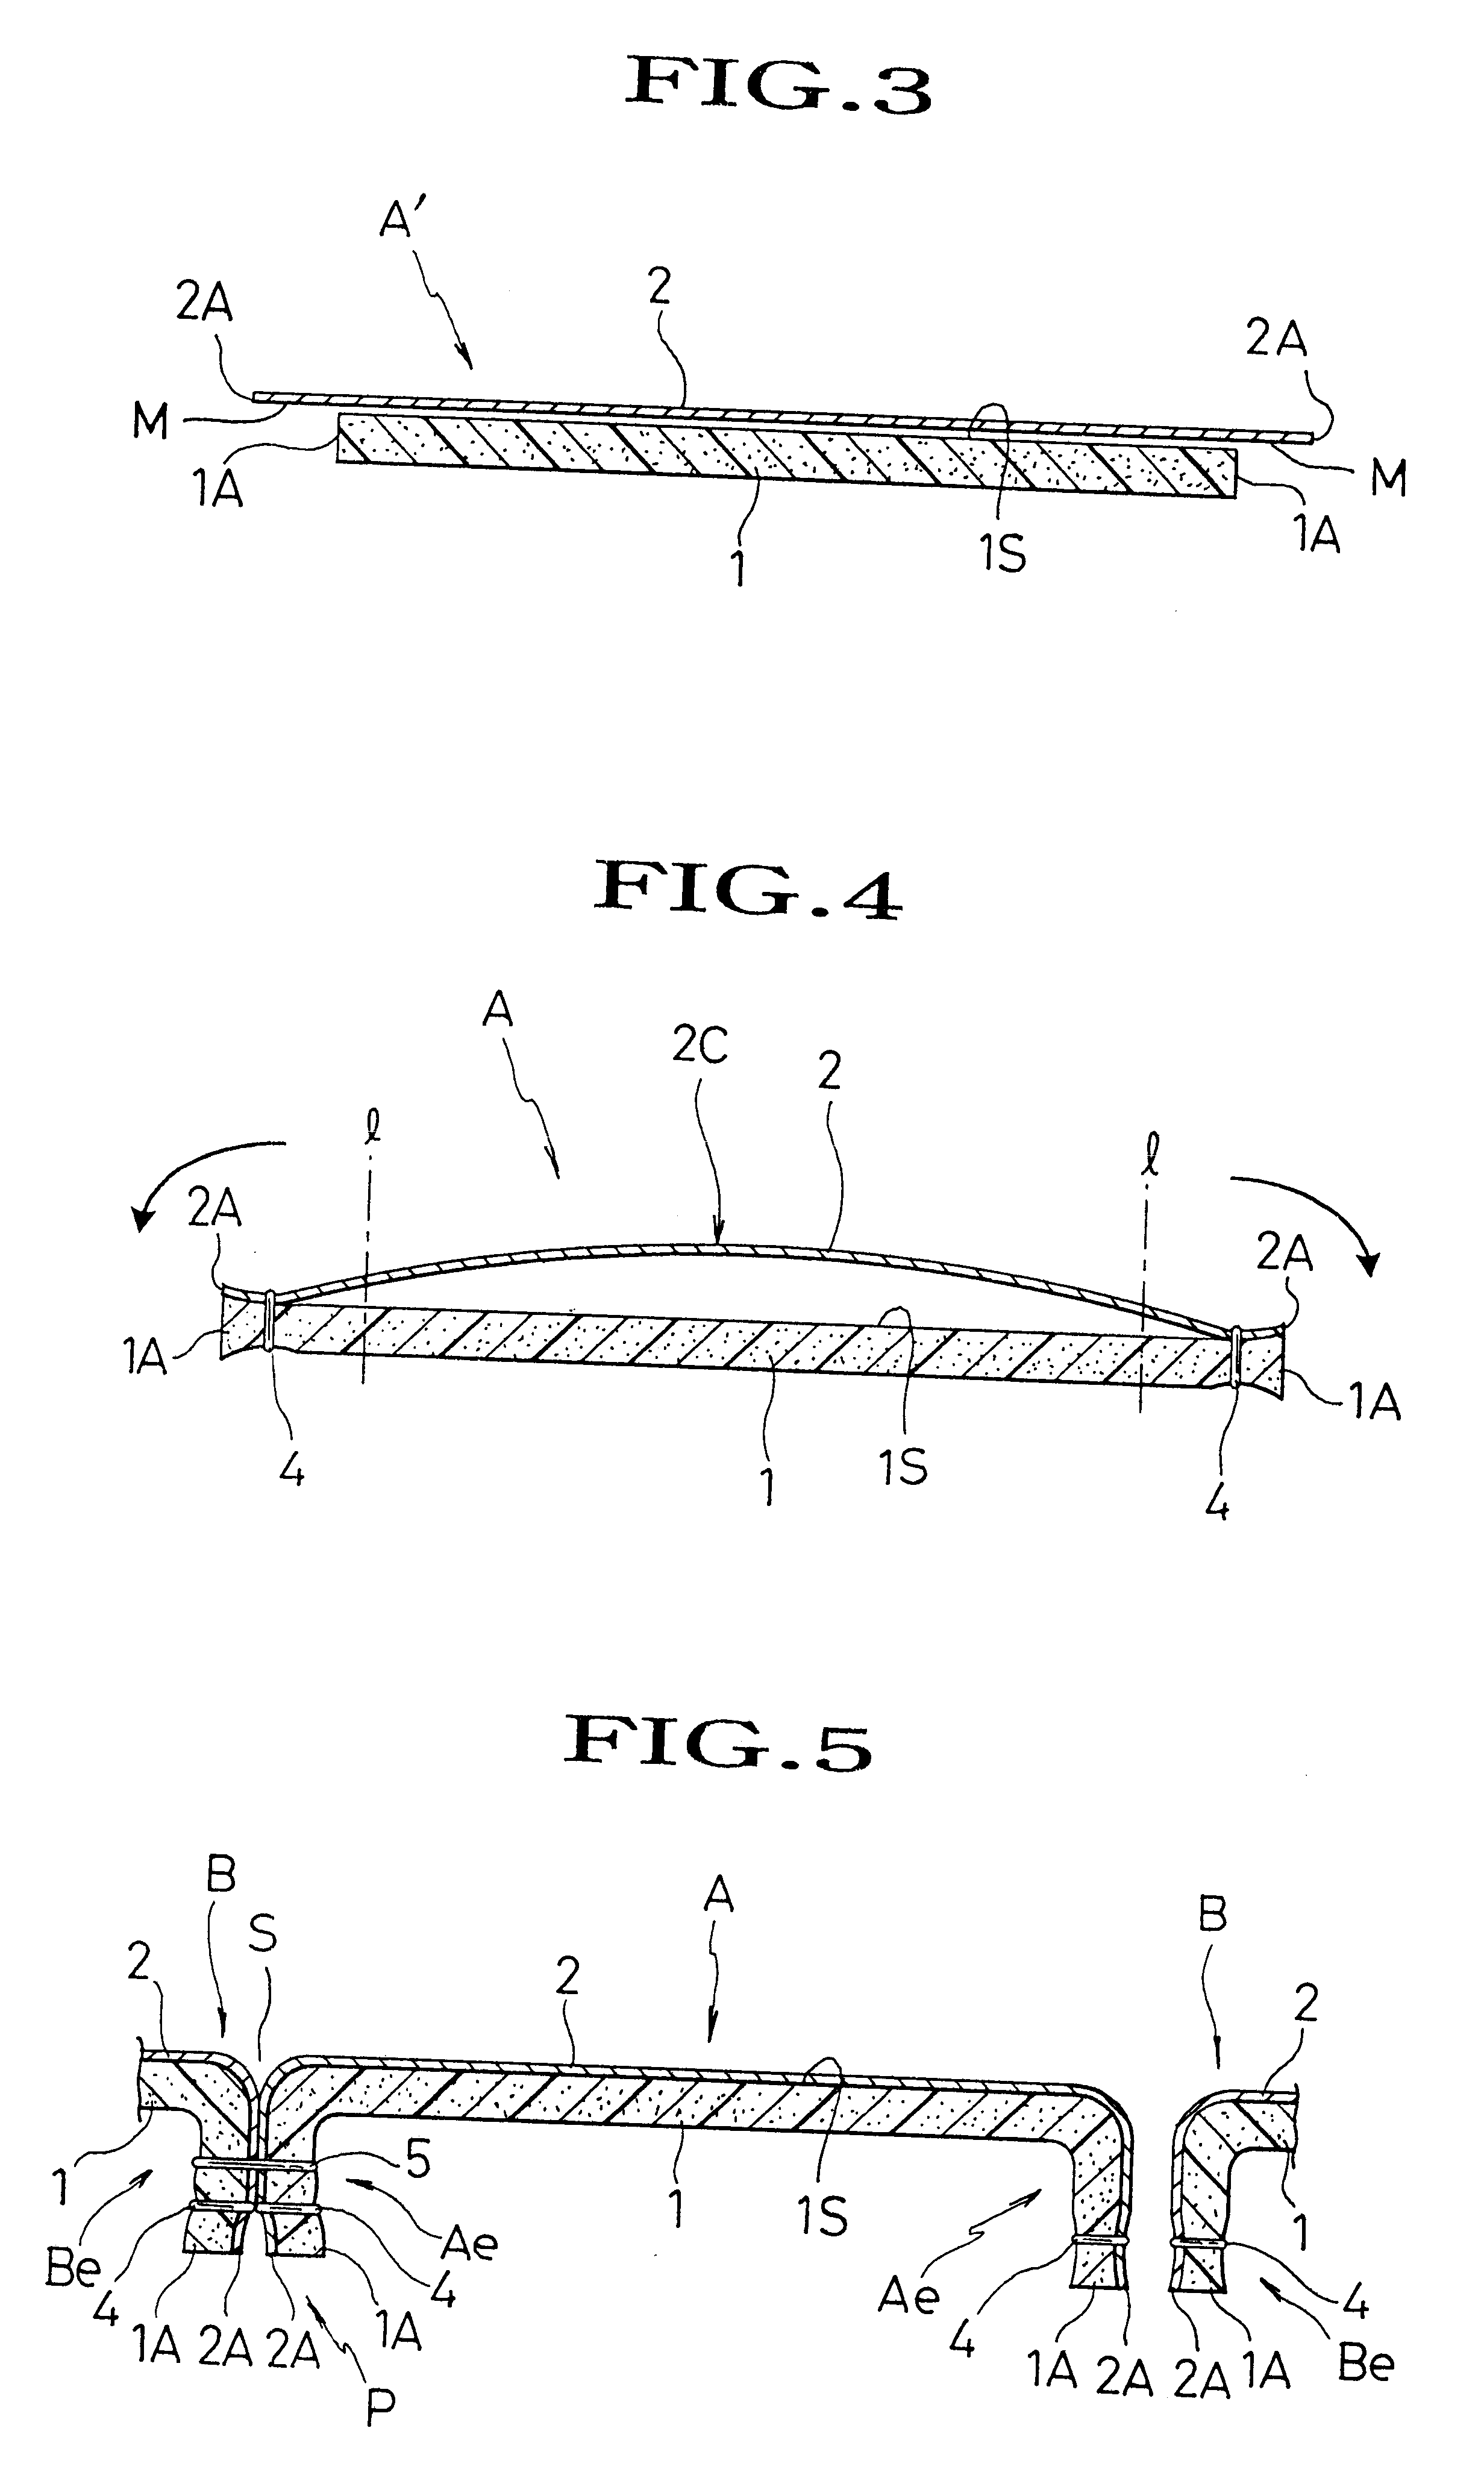 Method for forming a foamed product integral with trim cover assembly